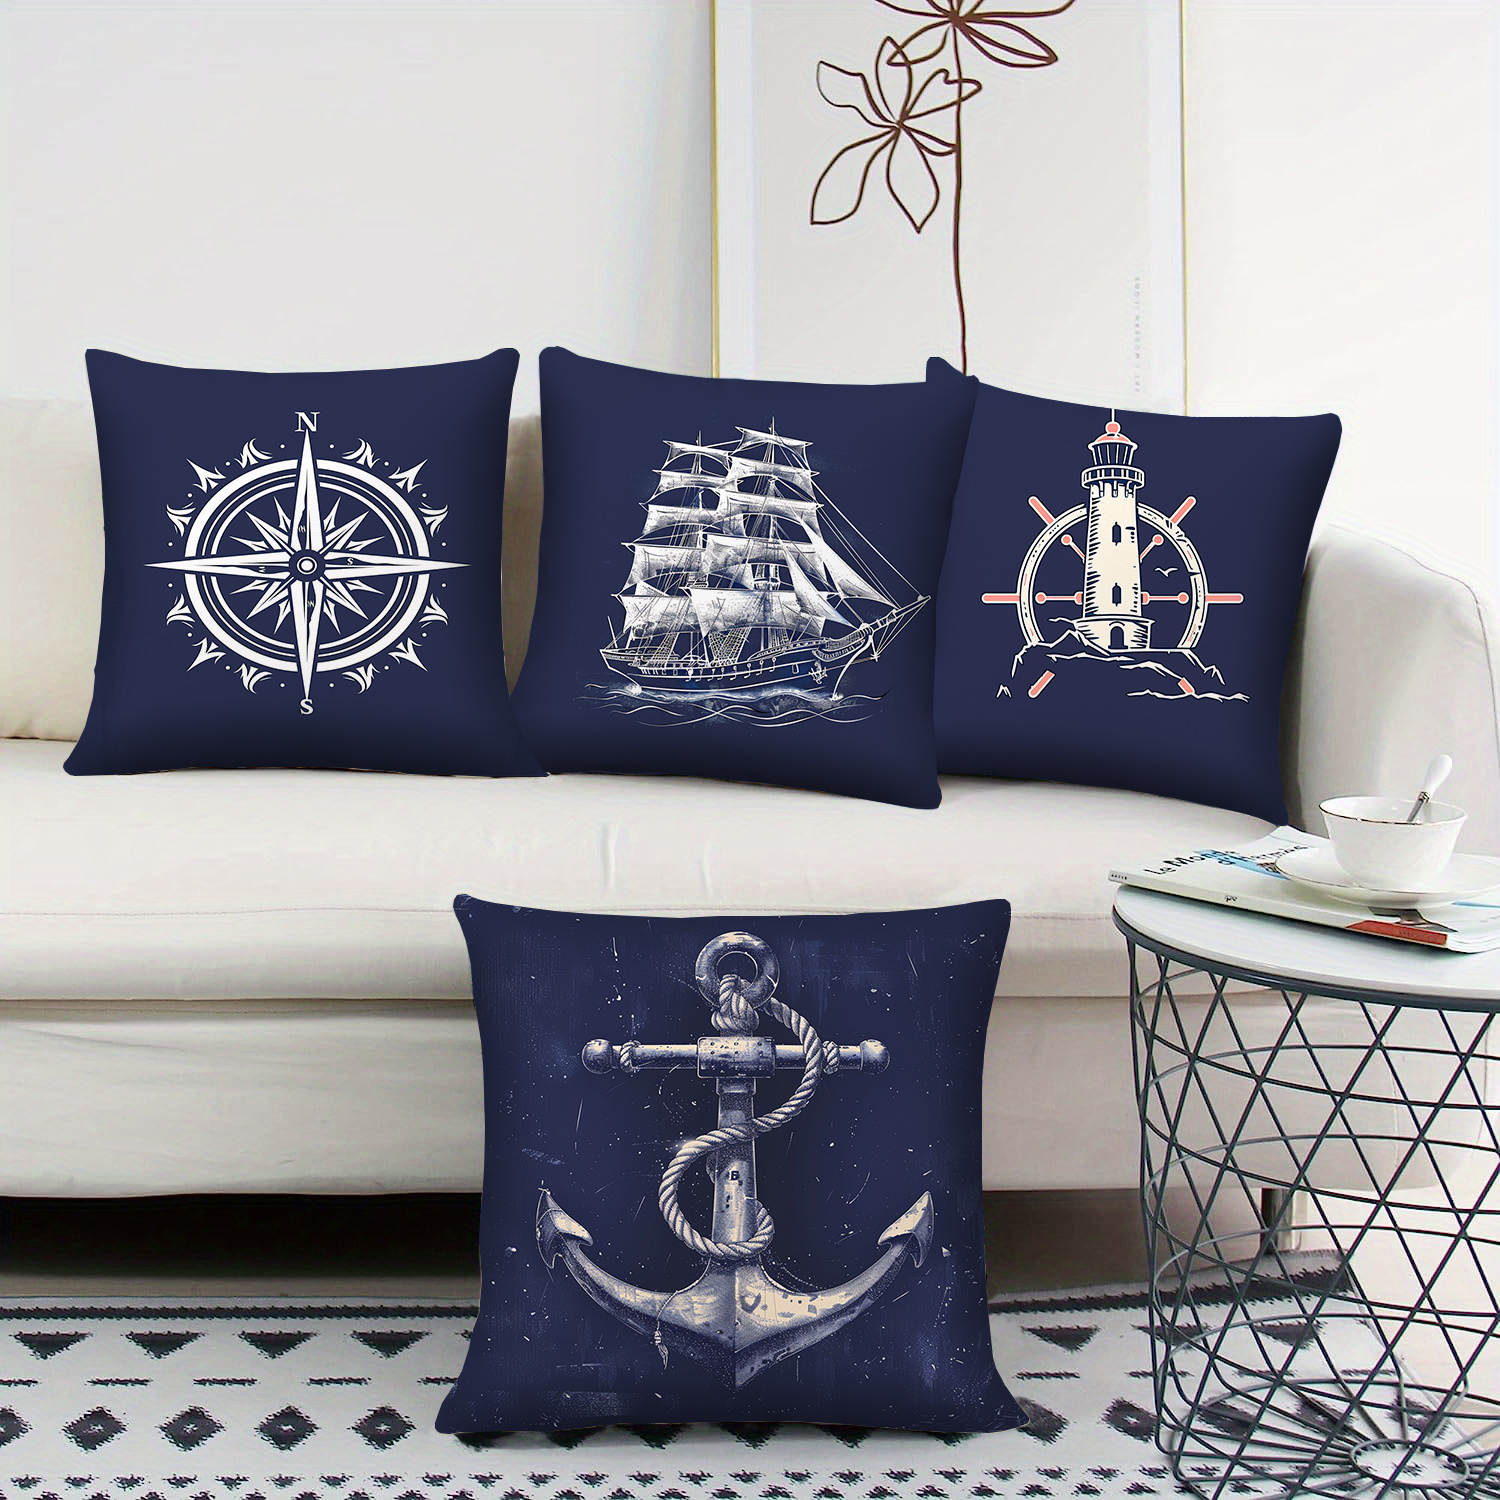 

Nautical Charm 4-piece Pillow Cover Set - Navy Blue, Coastal Anchor & Lighthouse Designs For Home Decor, Includes Zippered Cushion Covers For Sofa & Bed